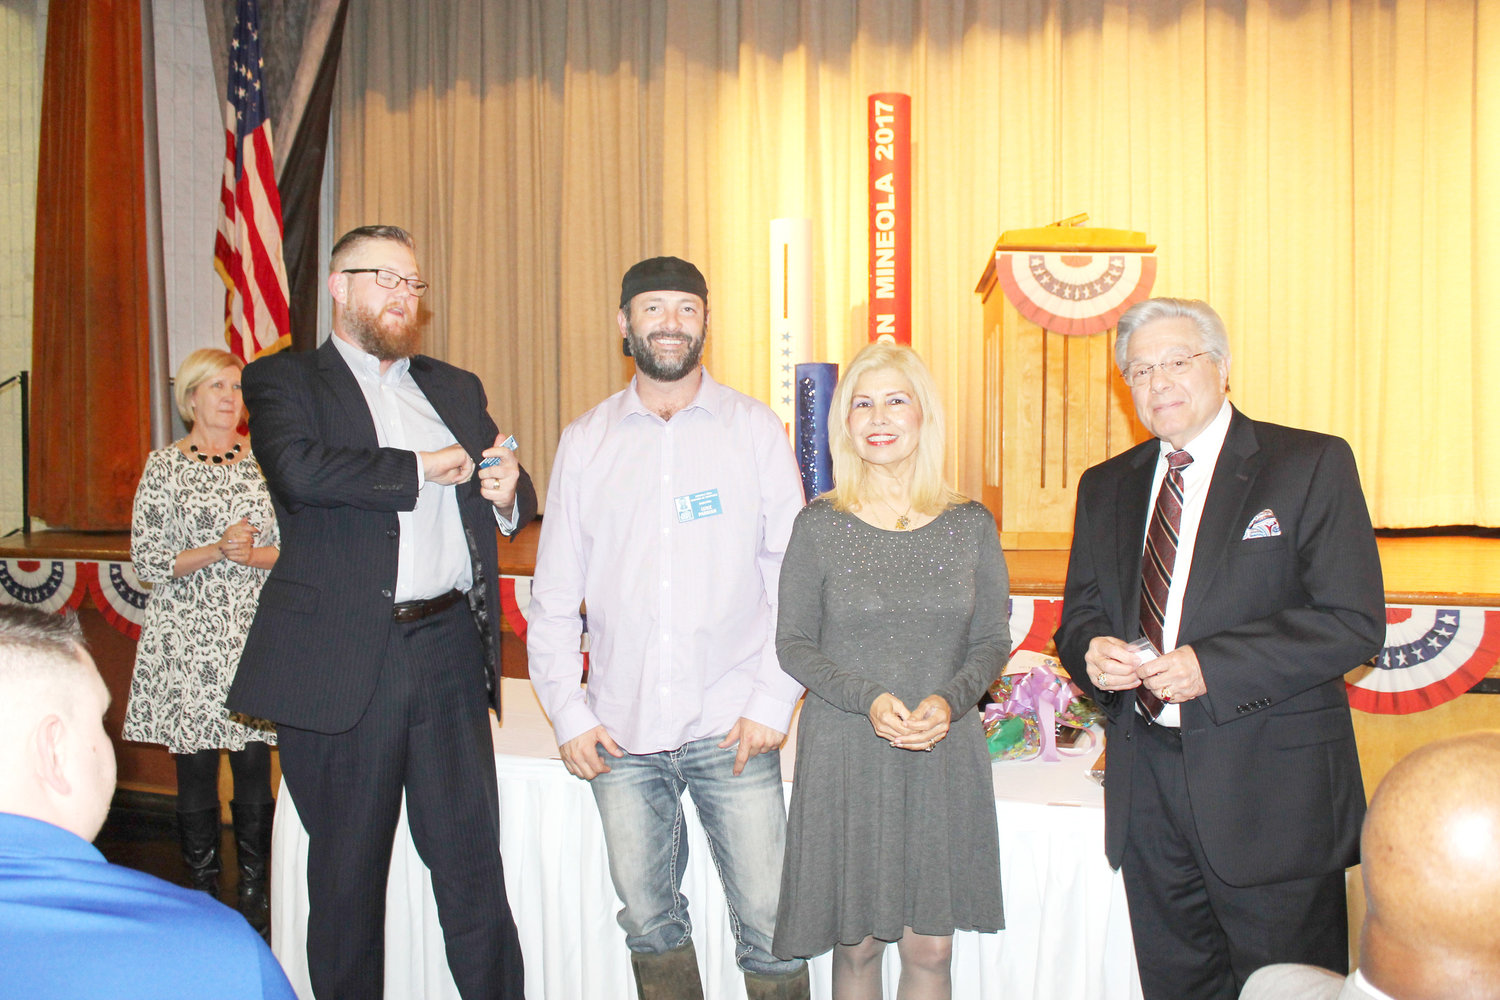 New chamber directors are from left, Jason Herring, owner of Cowburners; Luke Parrish, owner of Claw Daddy’s; Lupita Wisener of Wisener Field Airport and Jerry Richardson, president at Wood County National Bank in Mineola. Outgoing president Becky Moore is in the background on the left.